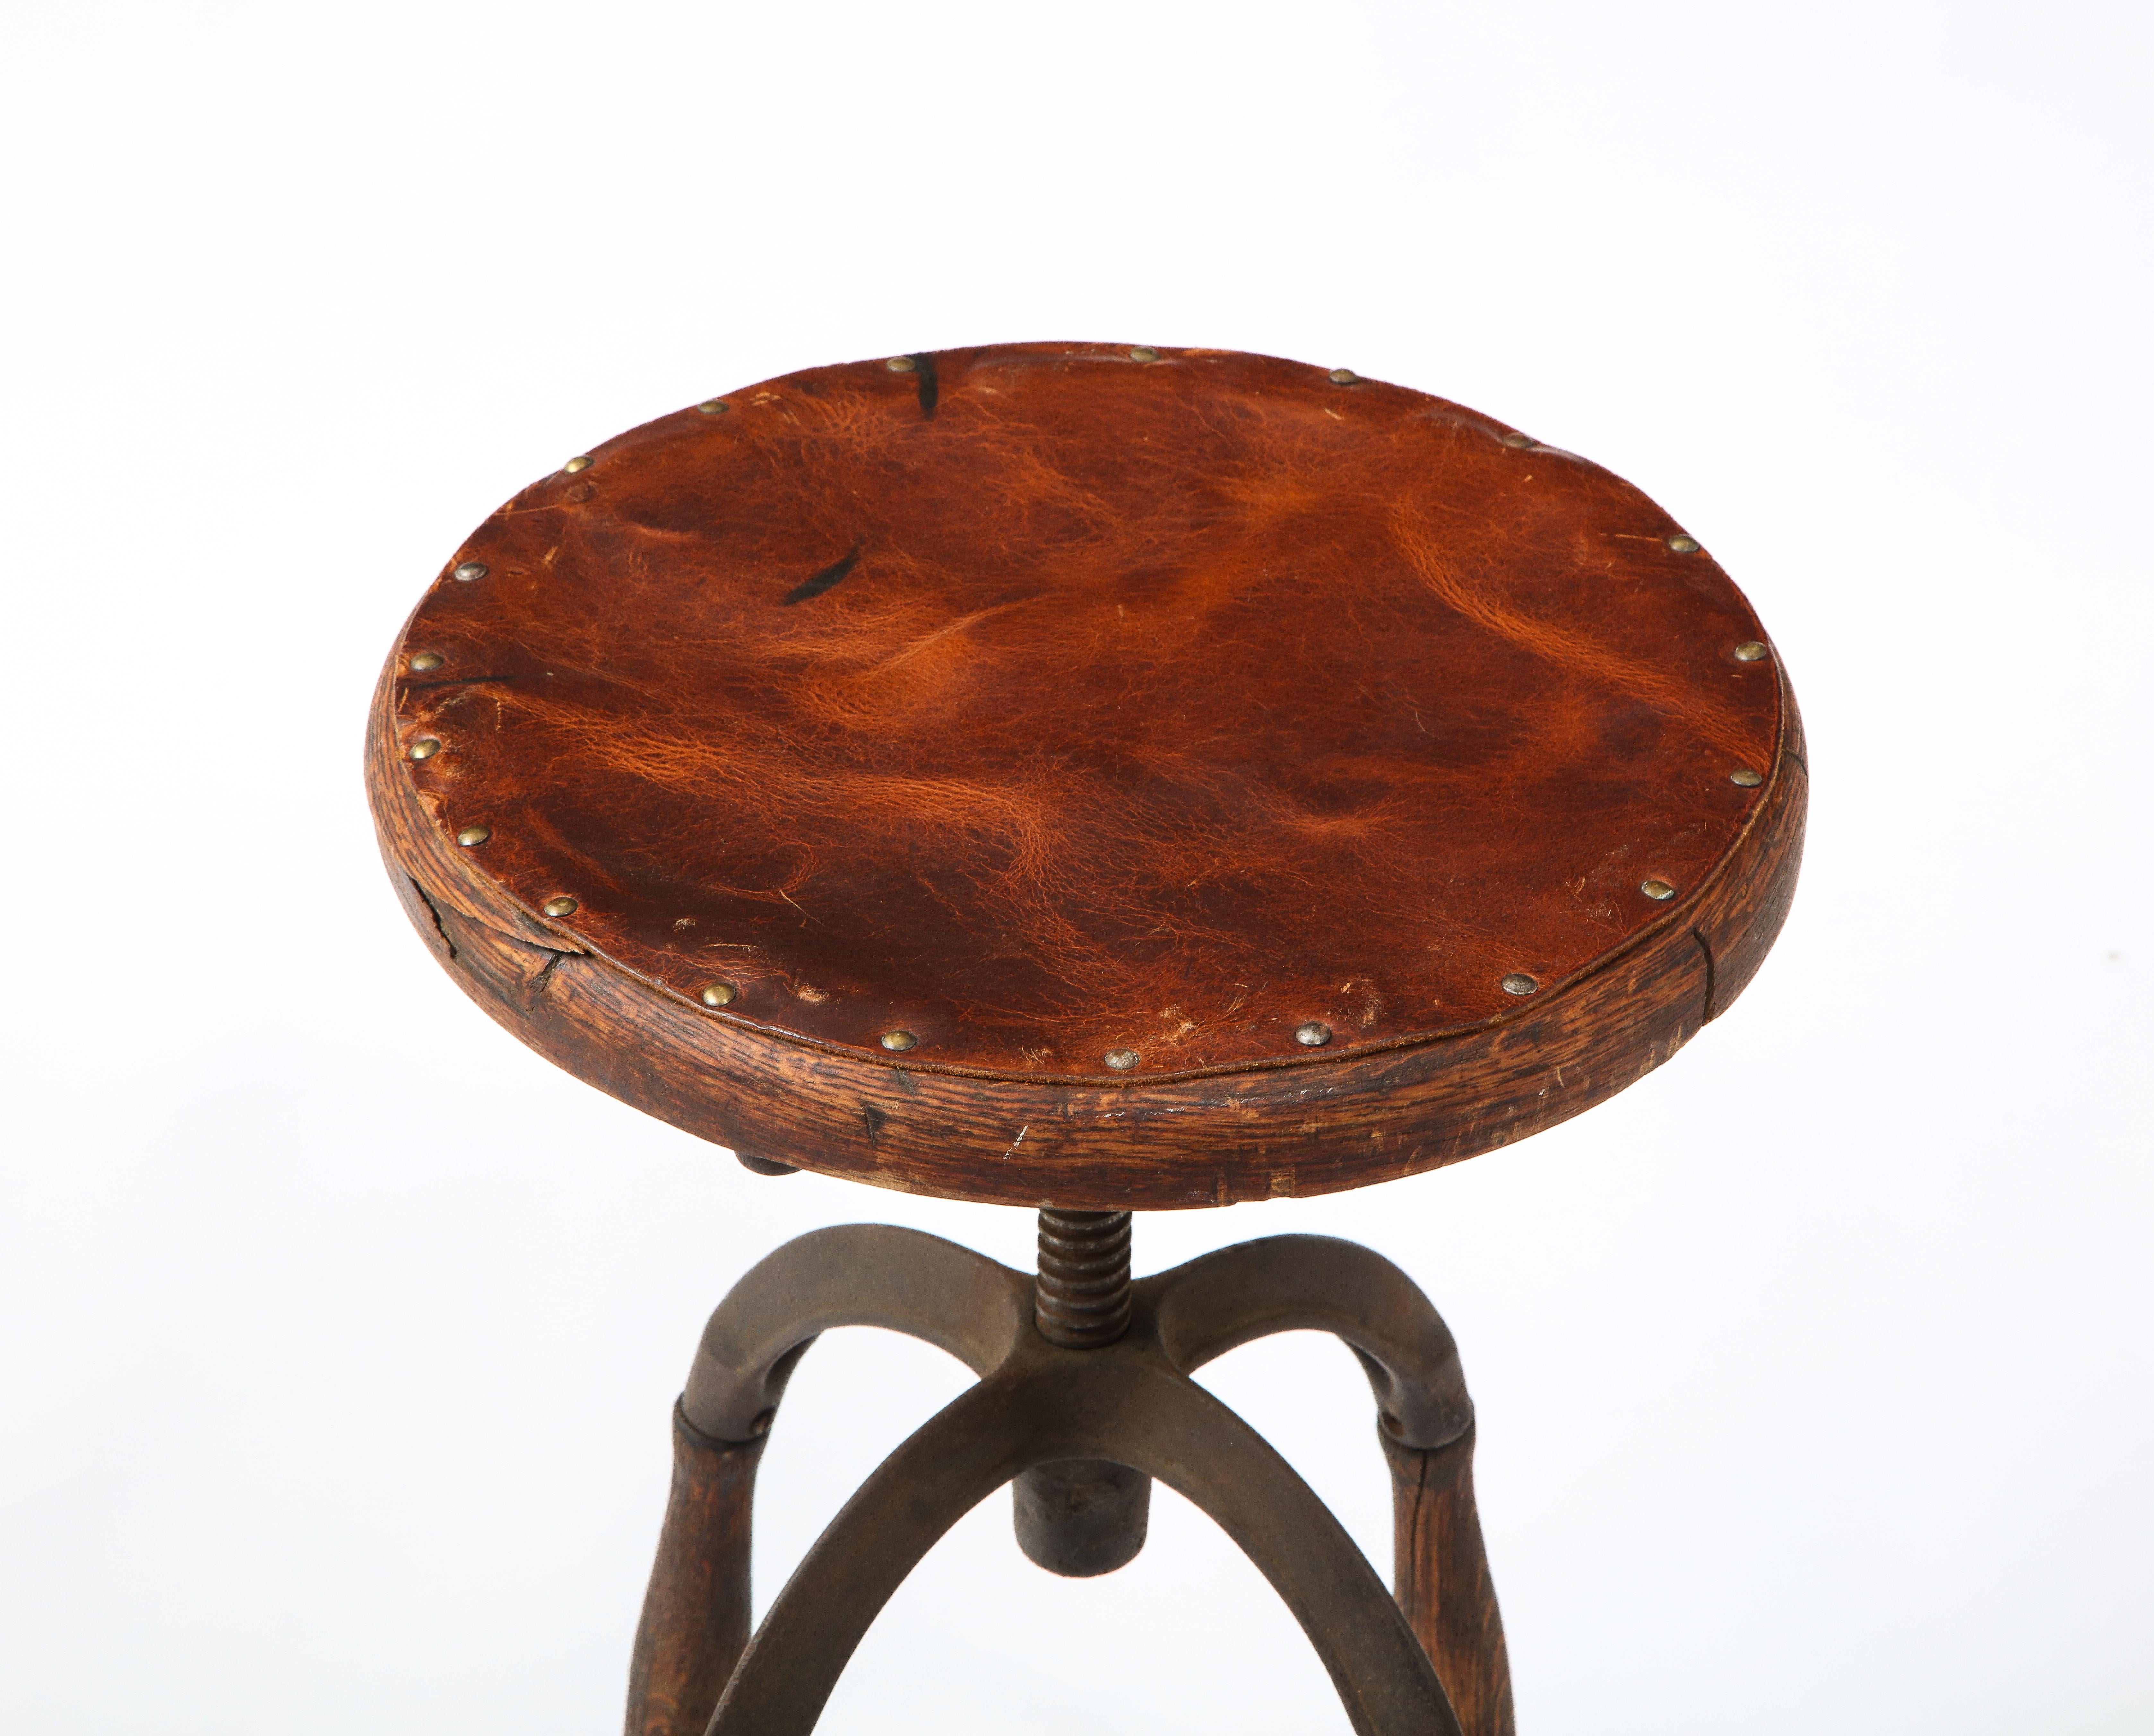 Industrial stool in cast iron and carved oak, it adjusts via an acme thread and the seat leather-covered wood.